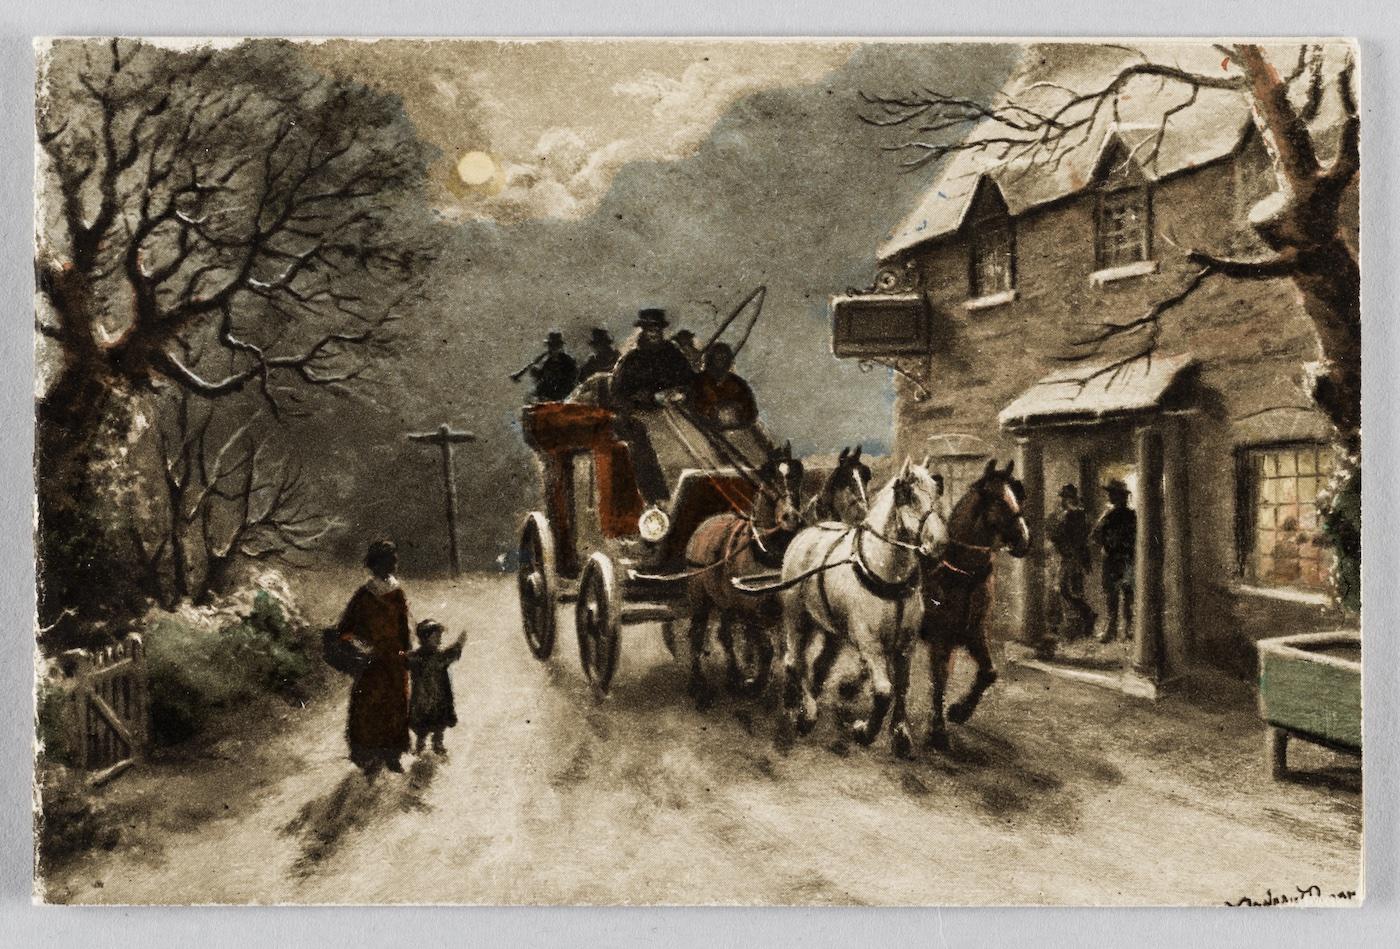 A holiday card depicting a carriage in a snowy village